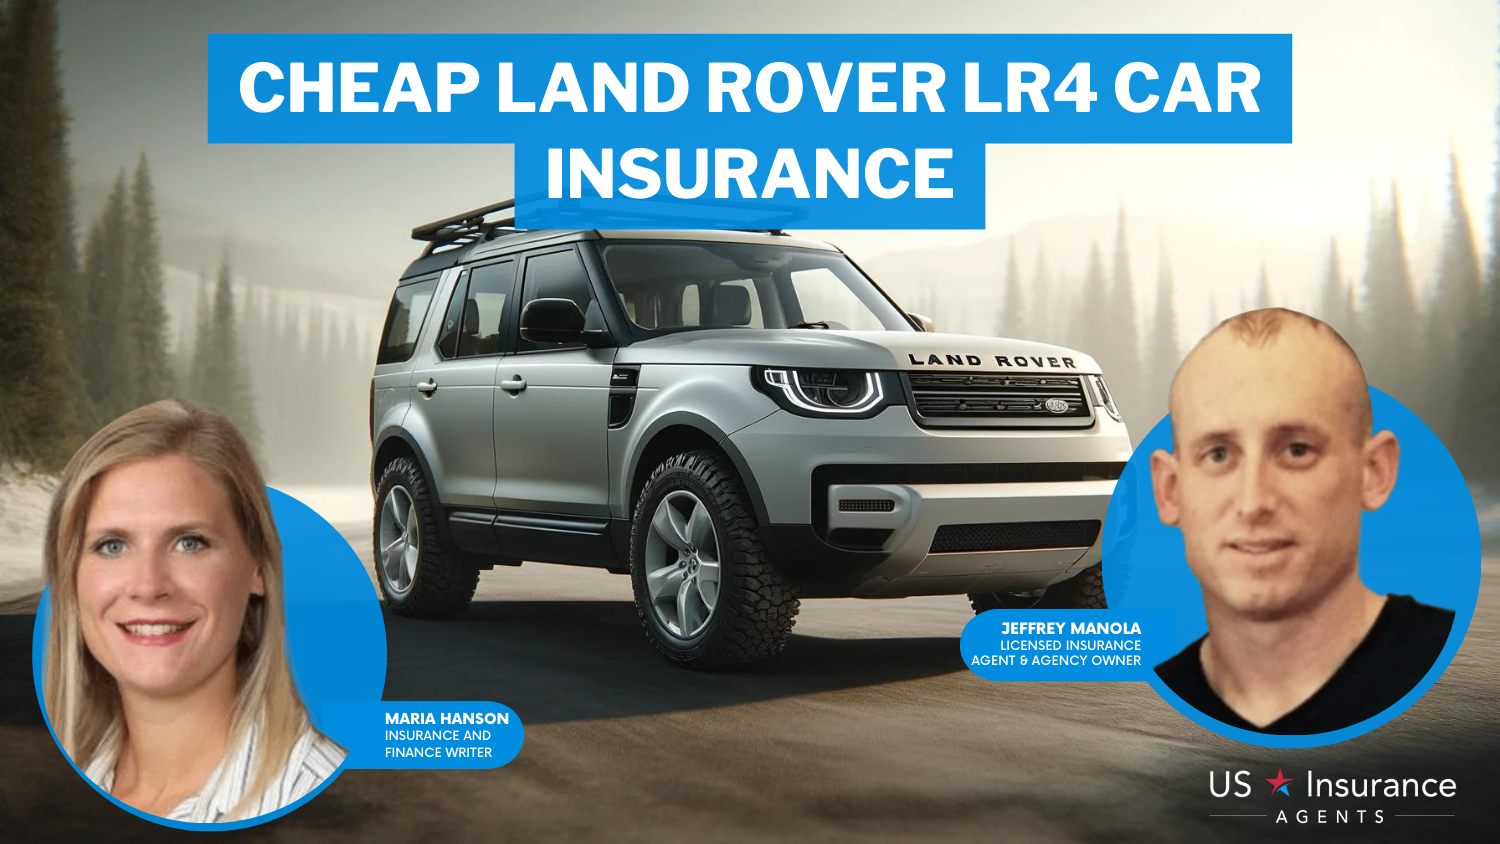 Auto-Owners, Mercury and Safeco: cheap Land Rover LR4 car insurance